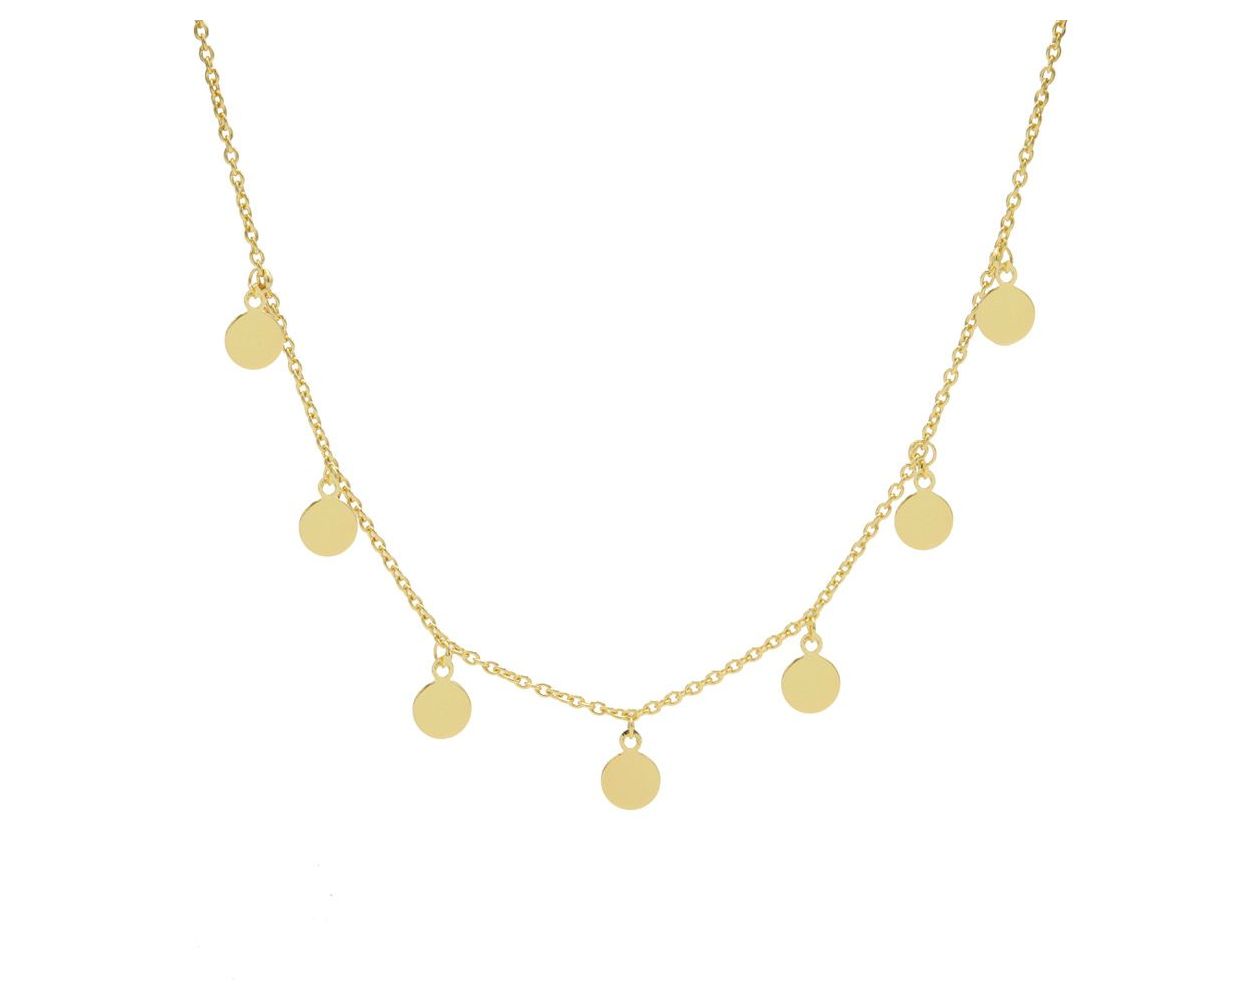 Karma Necklace 7 Discus - Gold plated